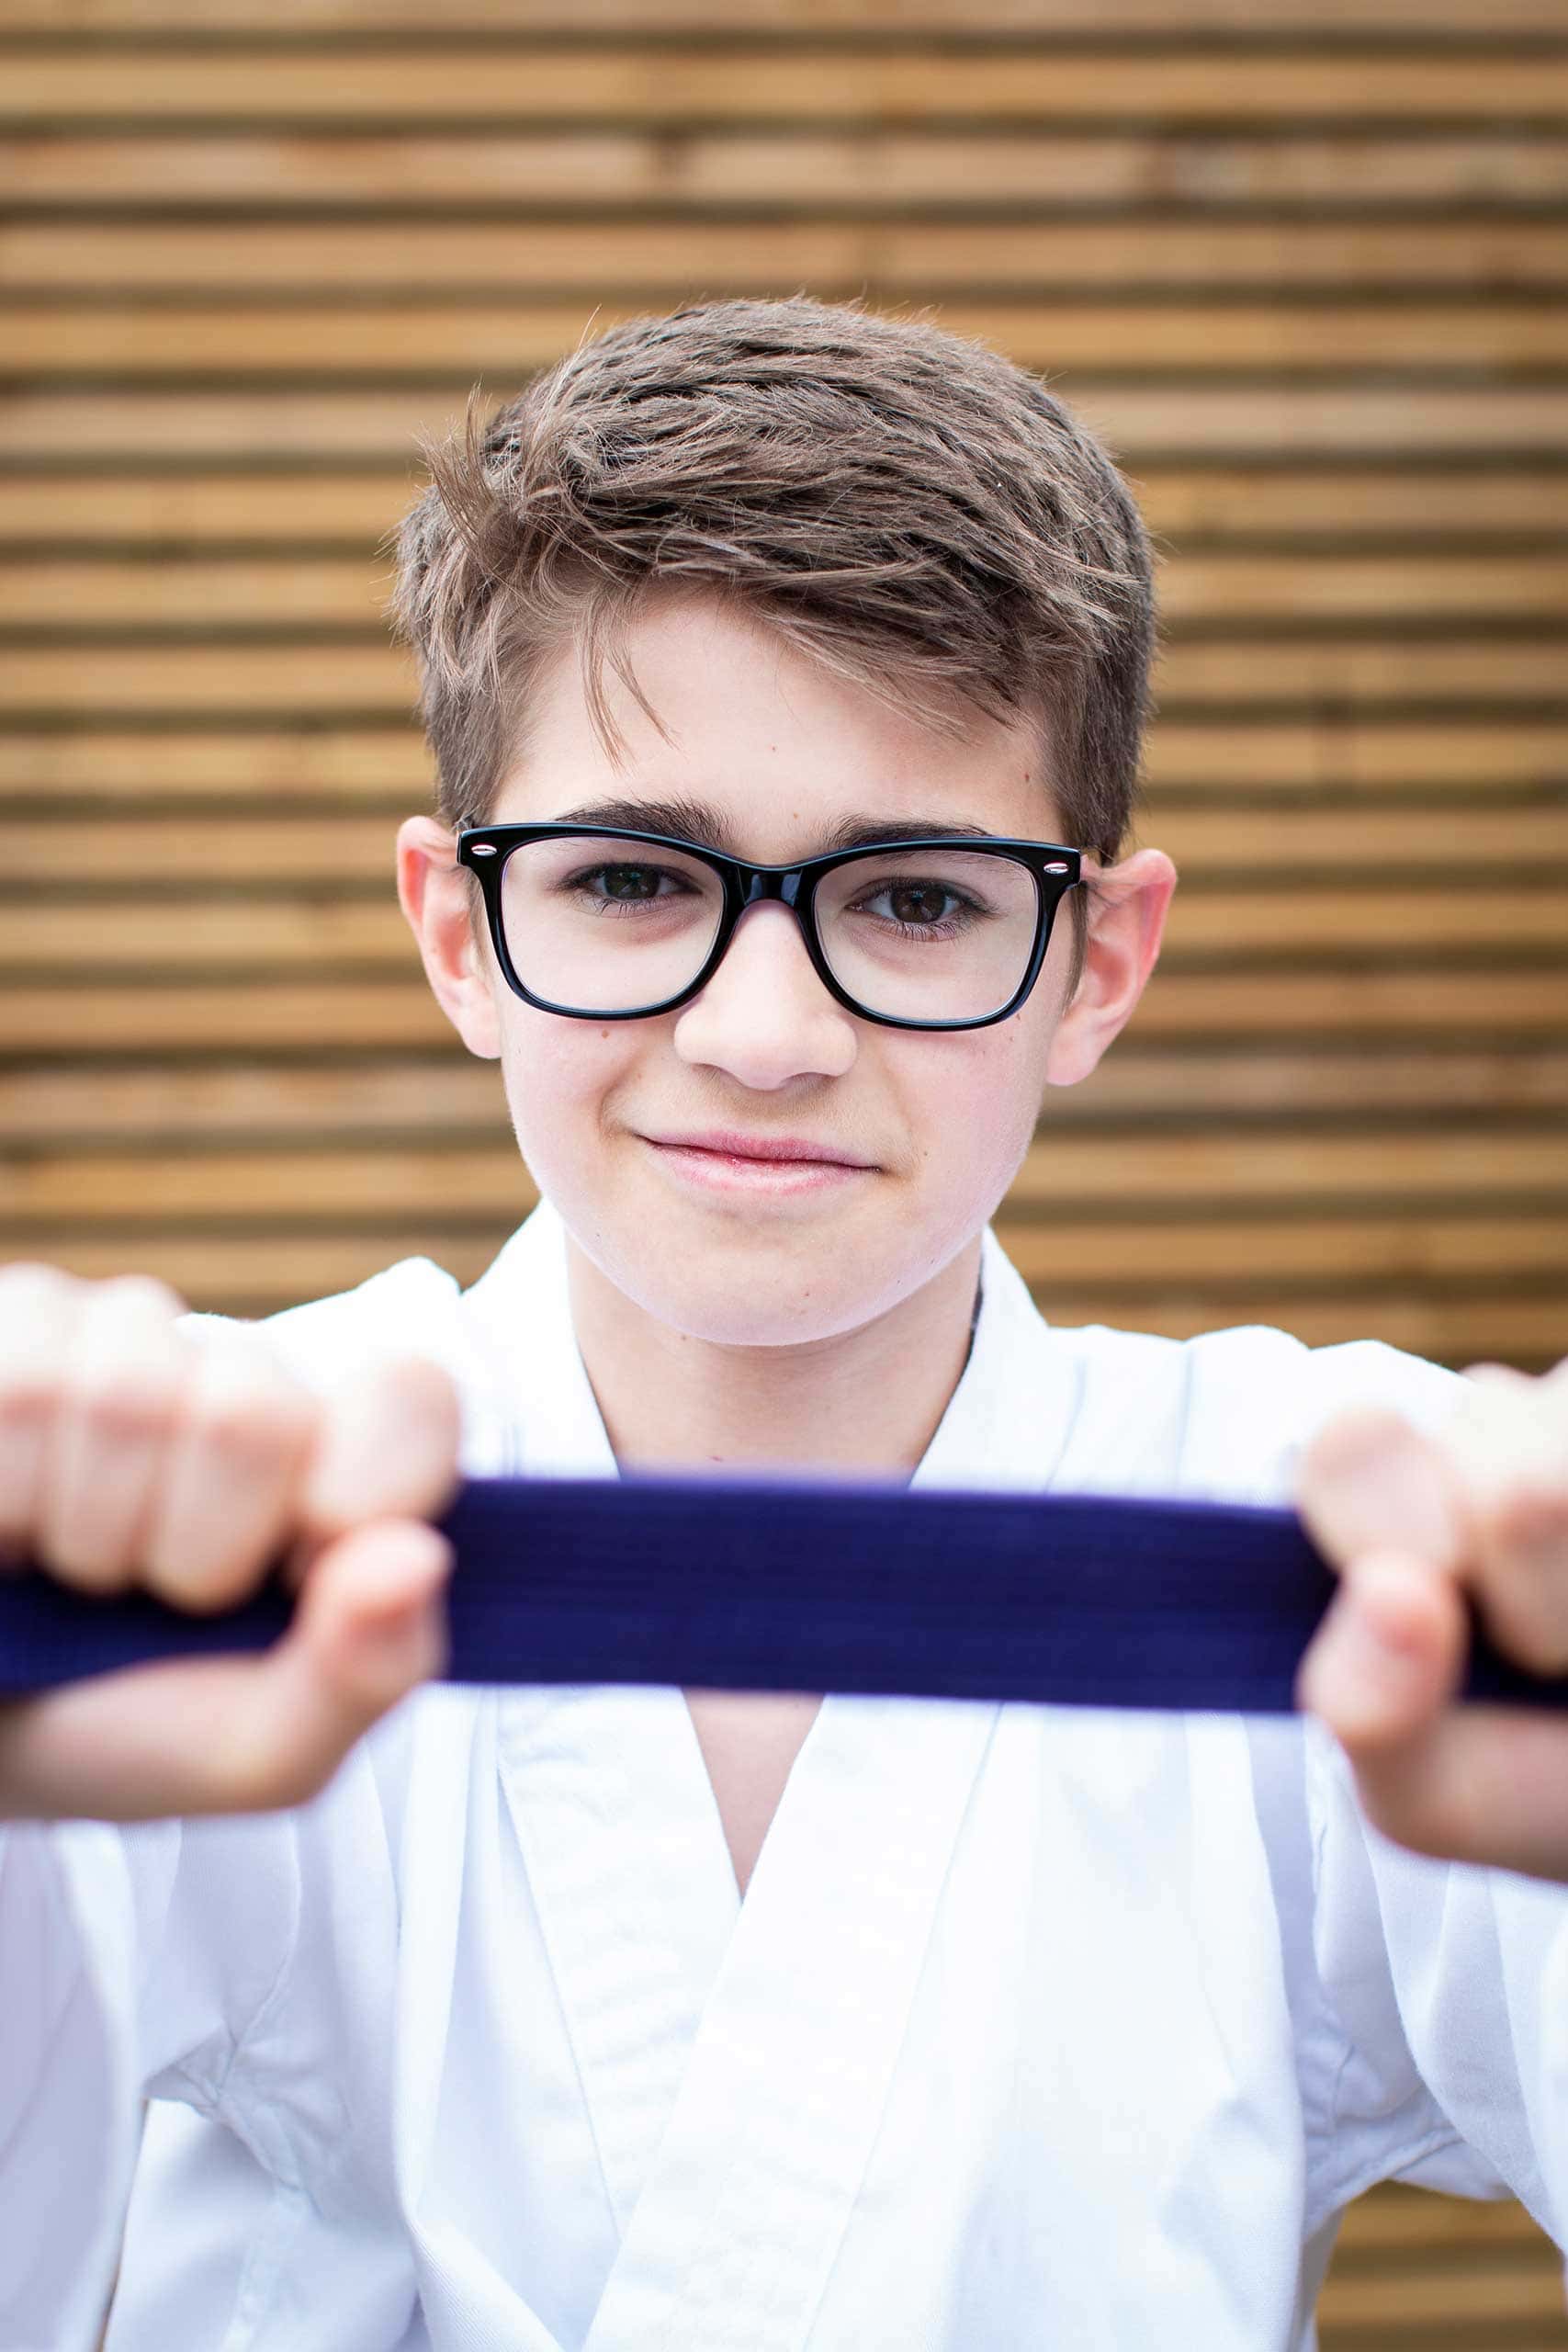 Teen Photos - Teenage boy holding purple karate belt in front of the camera